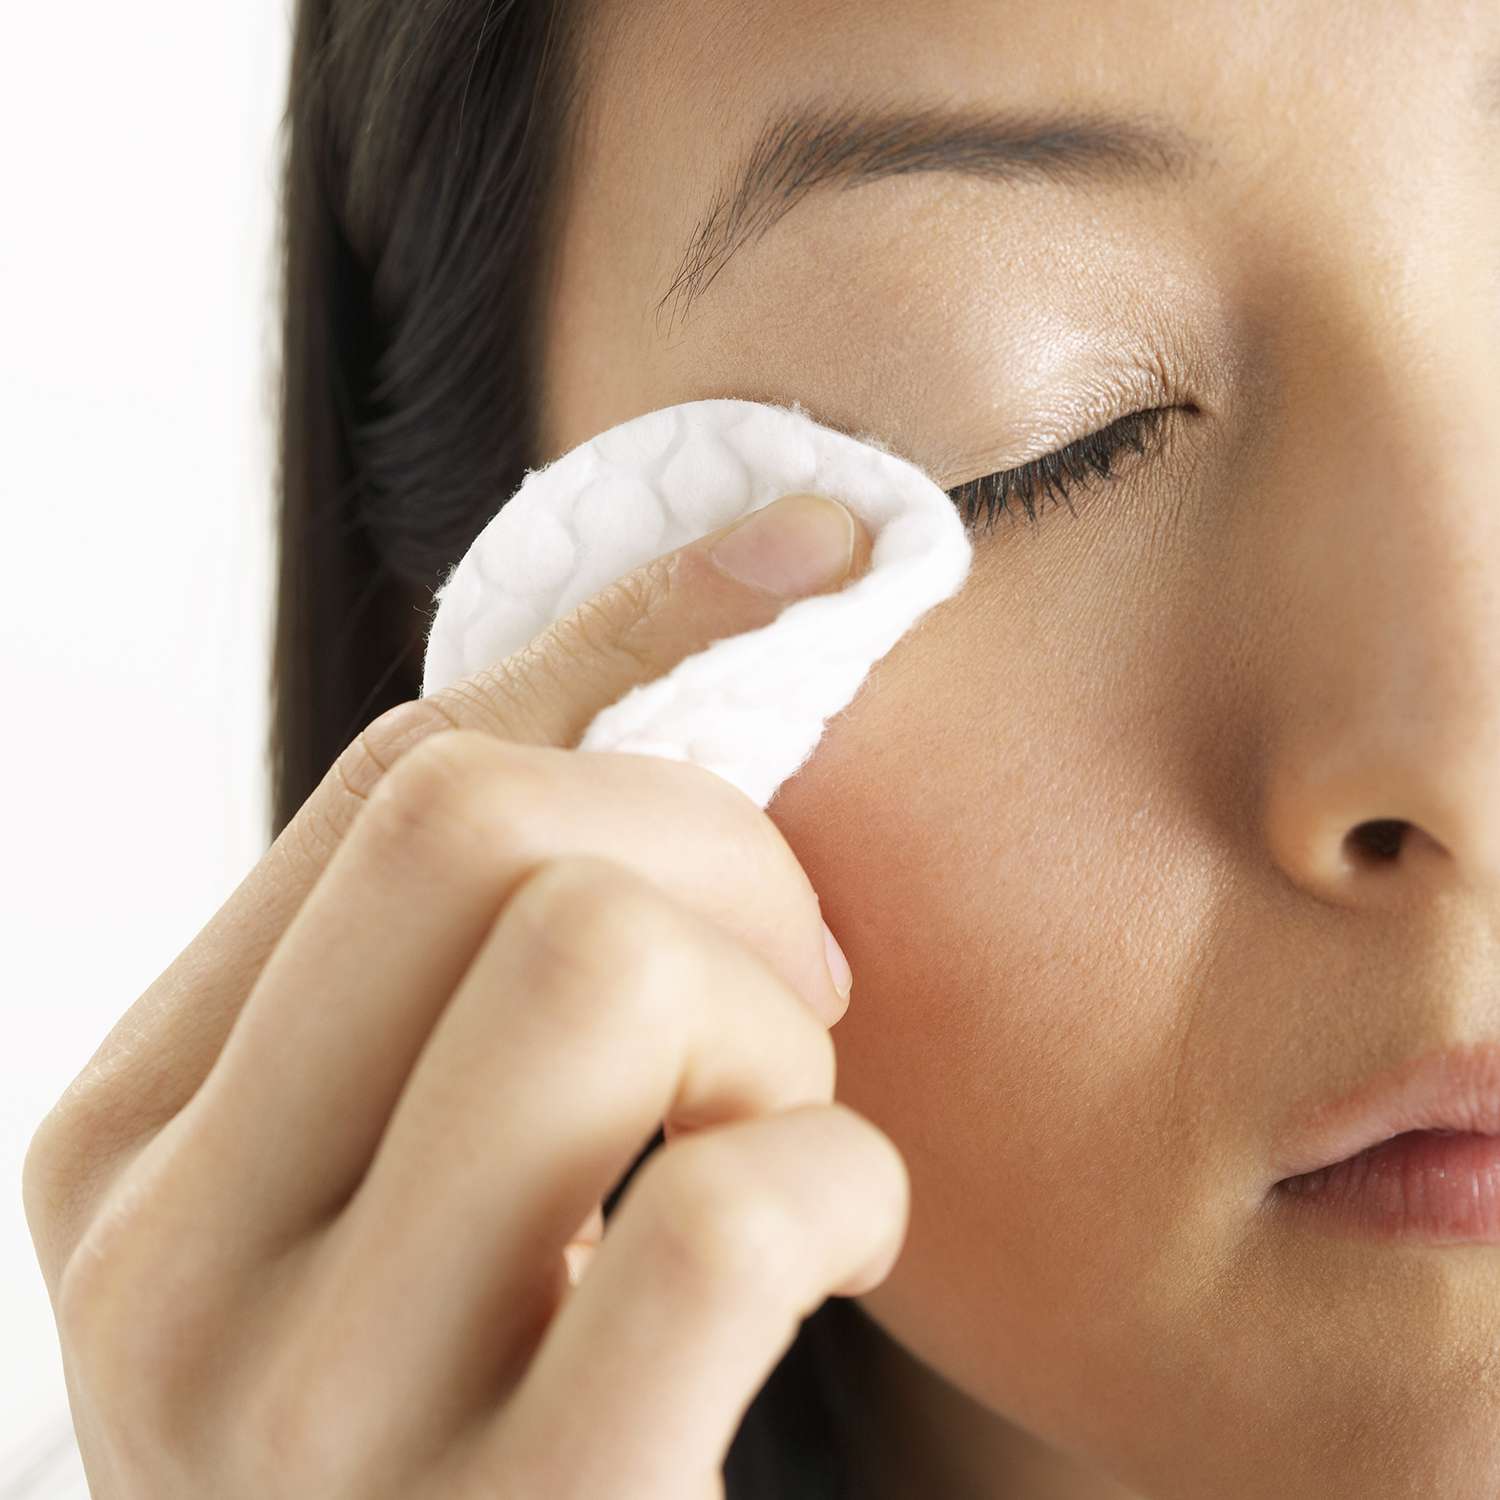 Woman wiping eye with cotton pad